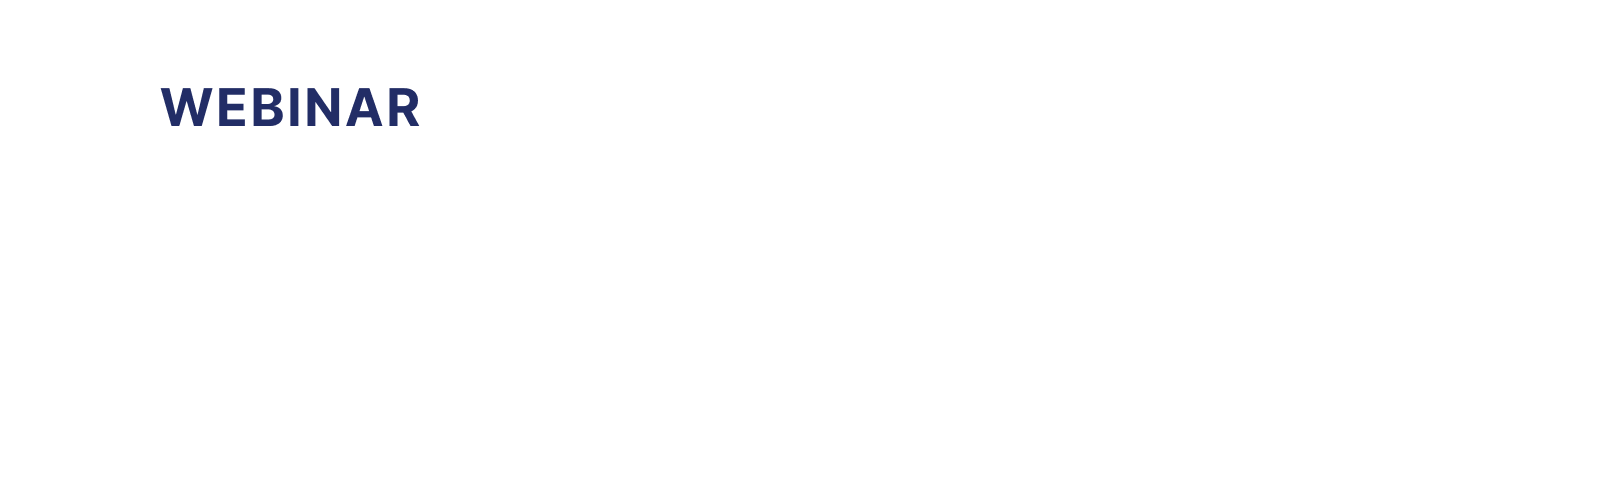 Creative Ways to Use Video to Increase Sales